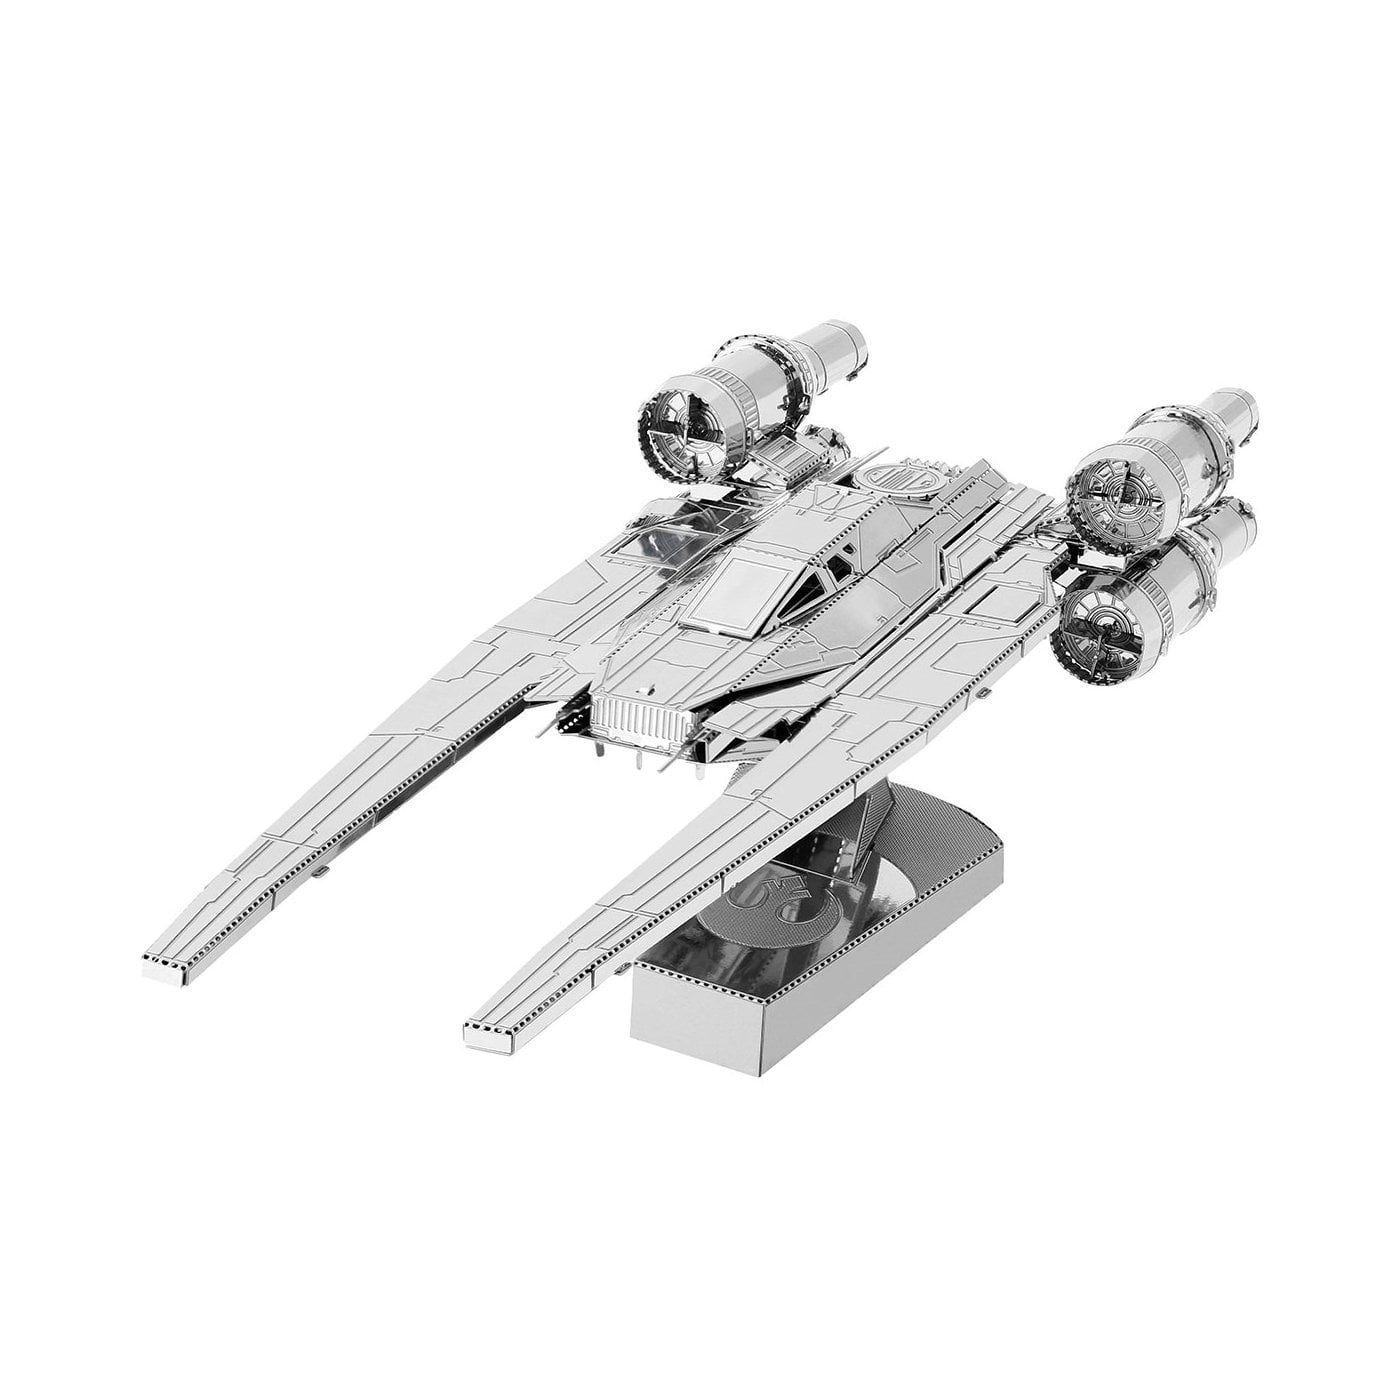 Fascinations Metal Earth Star Wars AT-AT 3D Laser Cut Steel Puzzle Model Kit 